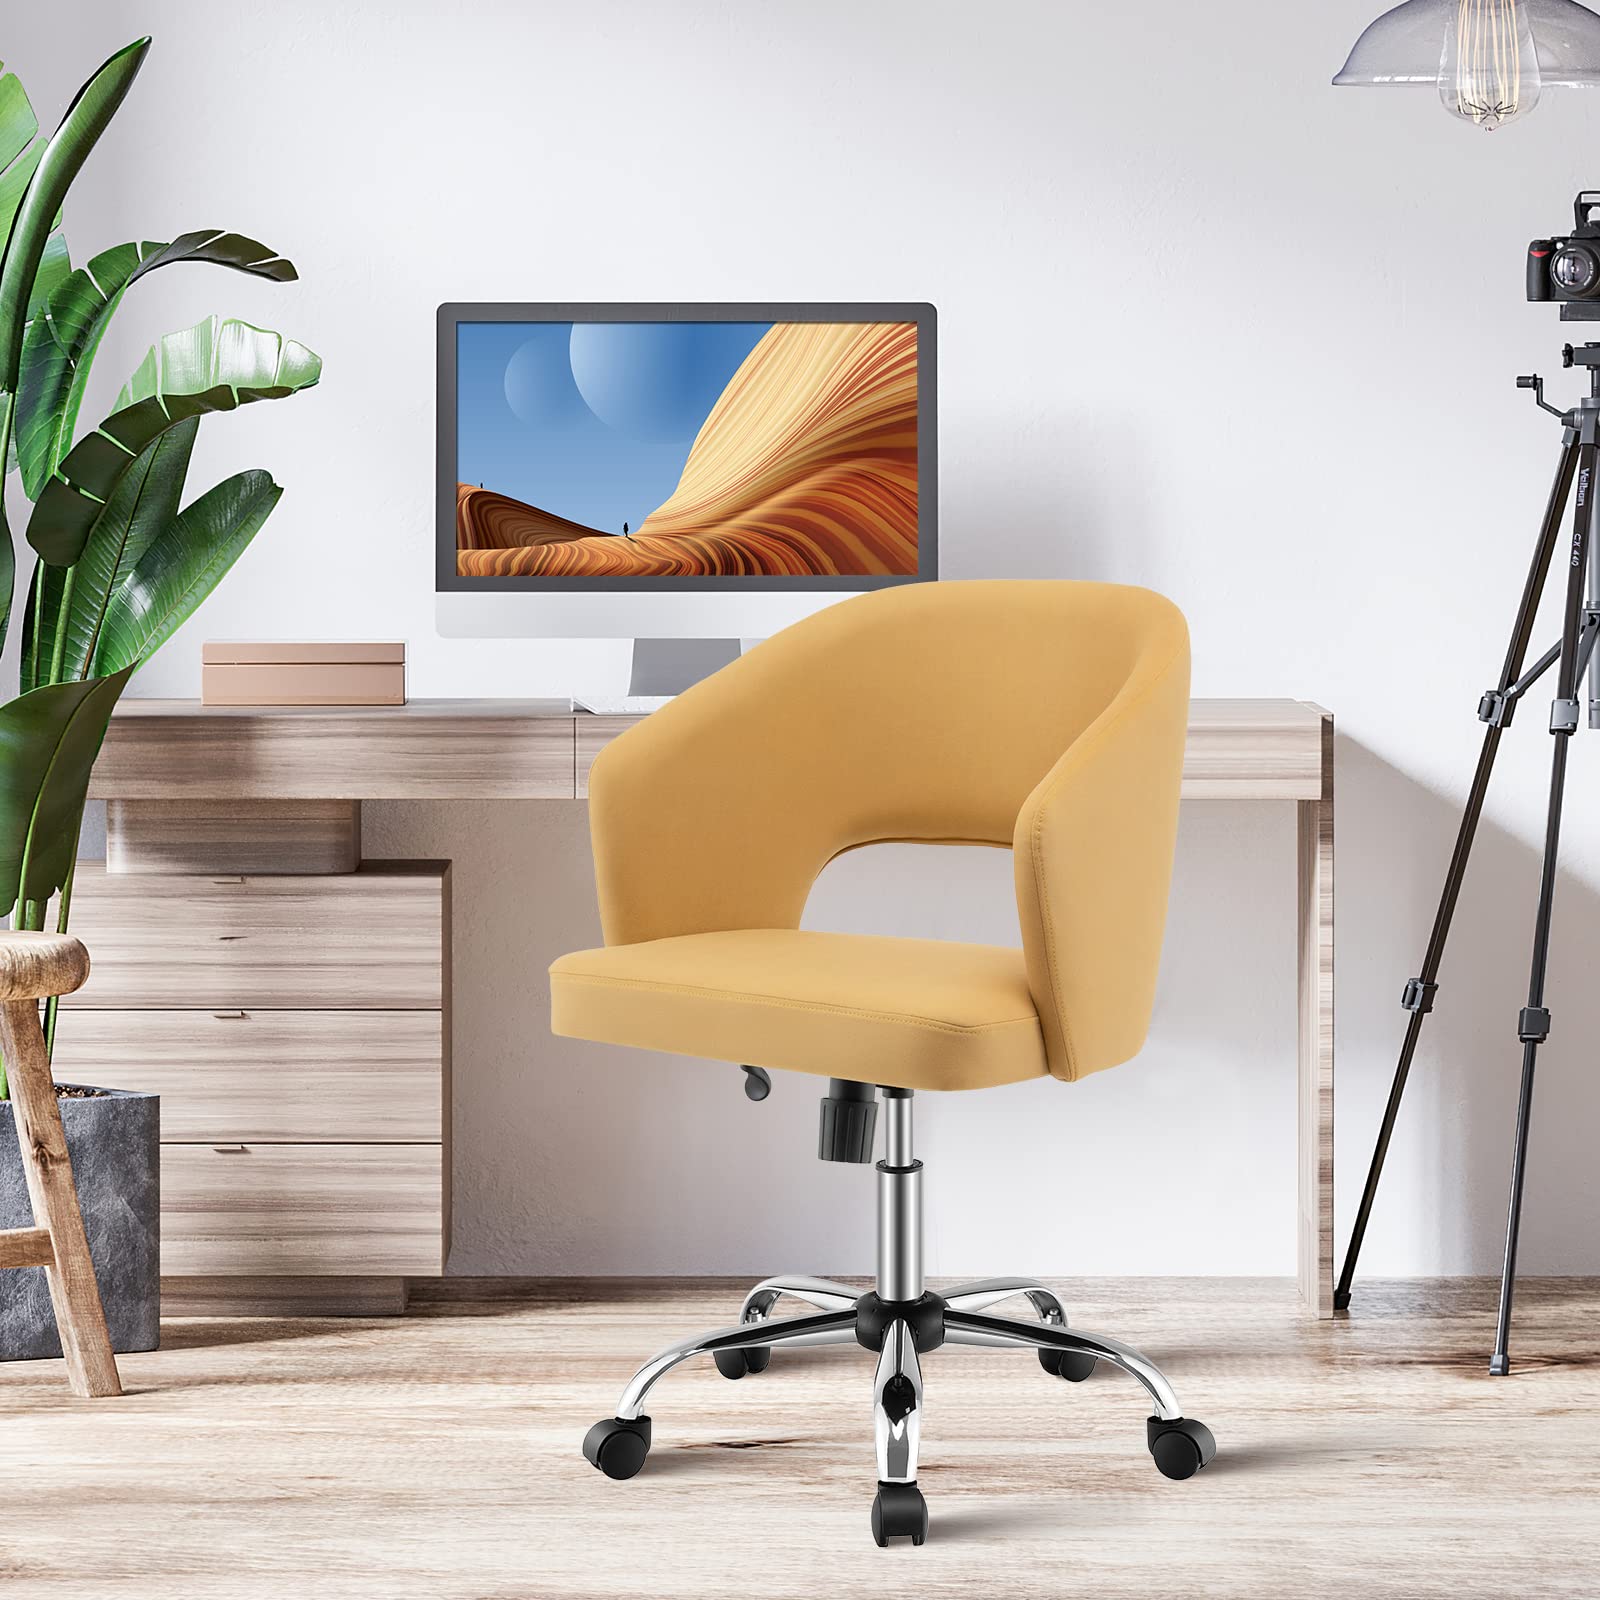 Giantex Home Office Desk Chair, Mid Back Swivel Chair with Hollow Design & Height Adjustable (Yellow)